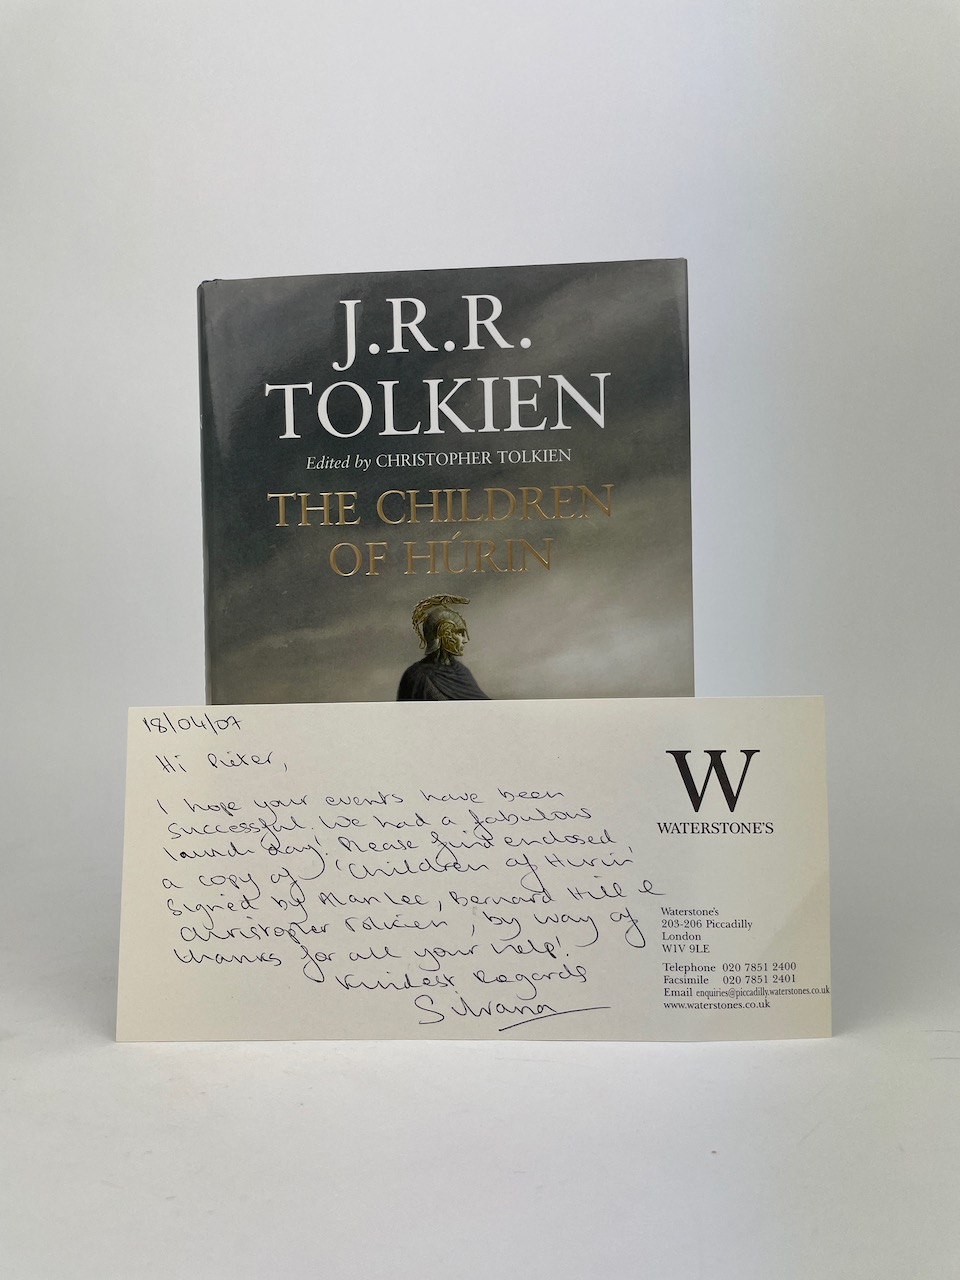 UK 1st Edition of The Children of Hurin, signed by Christopher Tolkien, Allan Lee and Bernard Hill 18